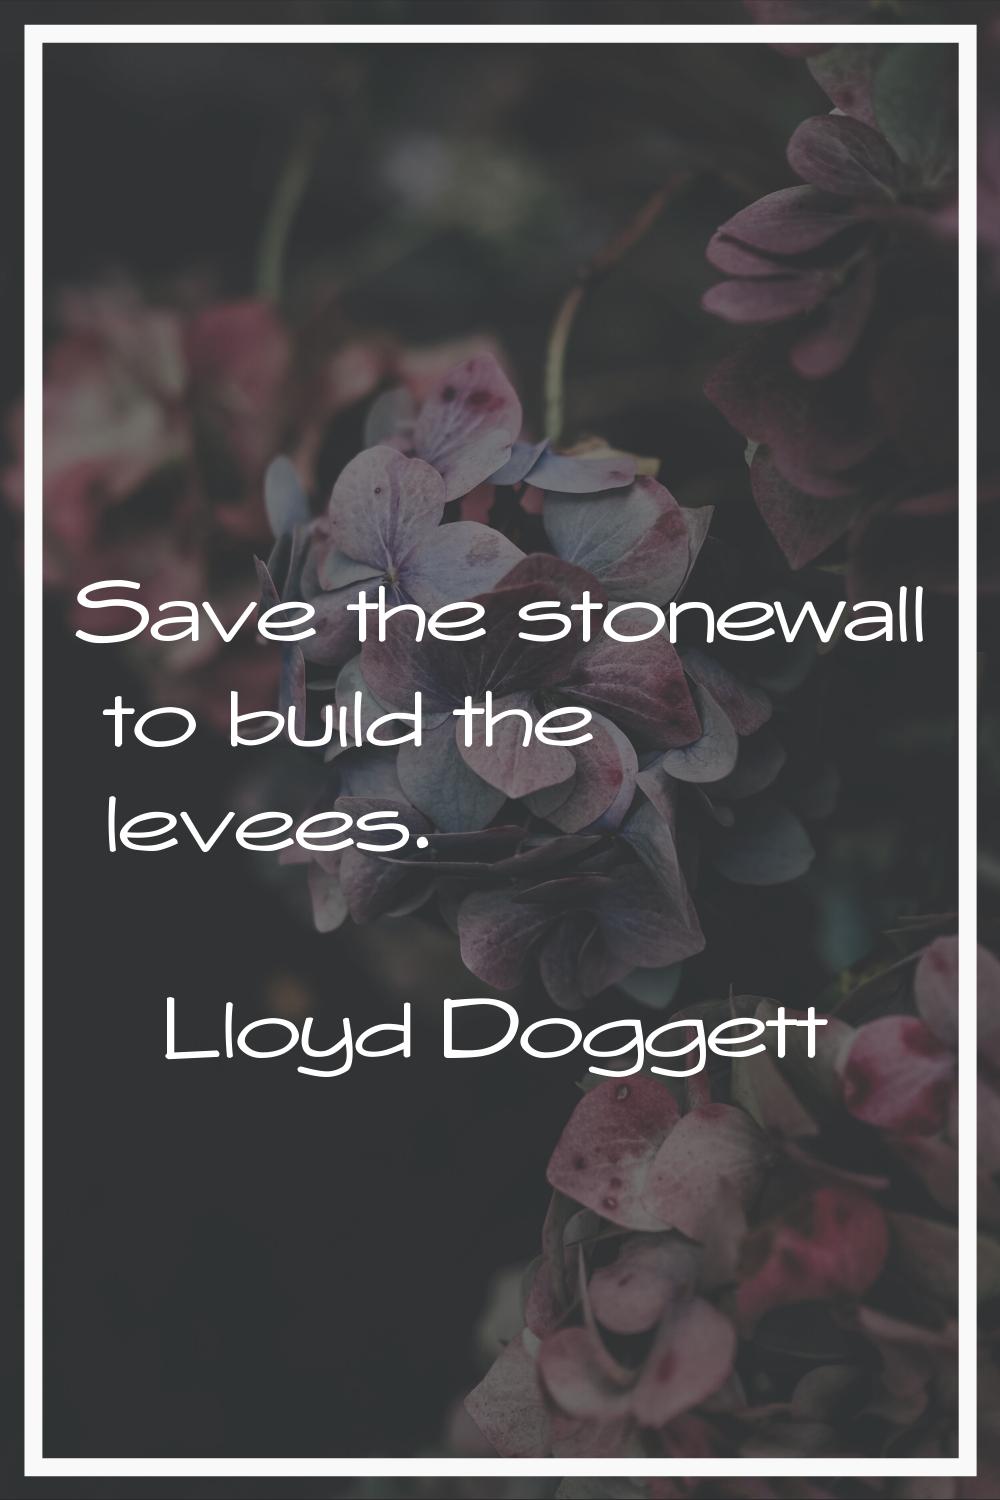 Save the stonewall to build the levees.